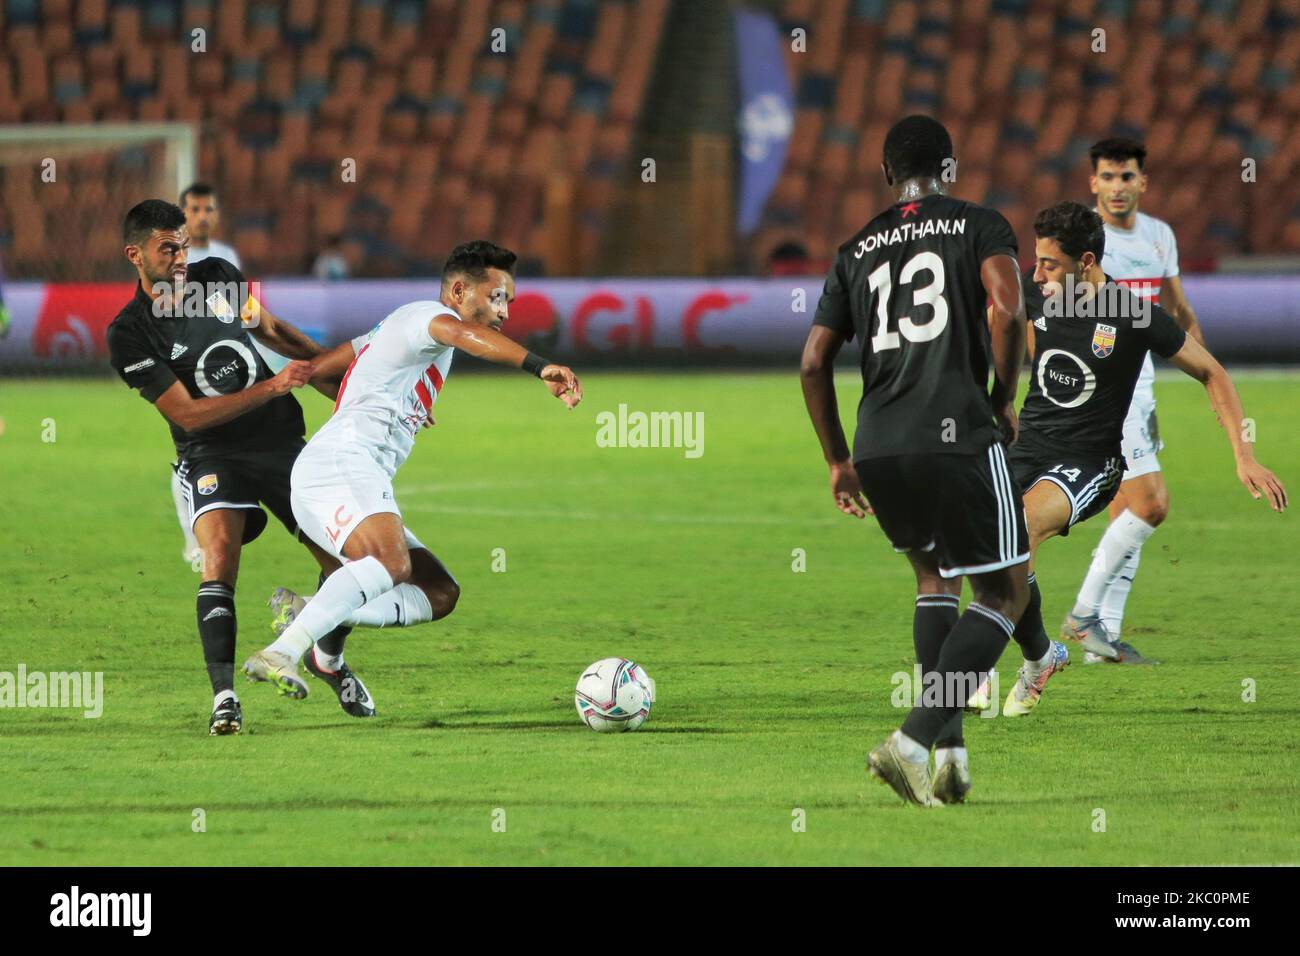 Zamalek player Youssef Ibrahim Obama in action against ElGouna FC player during the Egyptian Premier League soccer match between Zamalek and El Gouna FC at Cairo Stadium, in Cairo, Egypt, 27 September 2020 (Photo by Ziad Ahmed/NurPhoto) Stock Photo